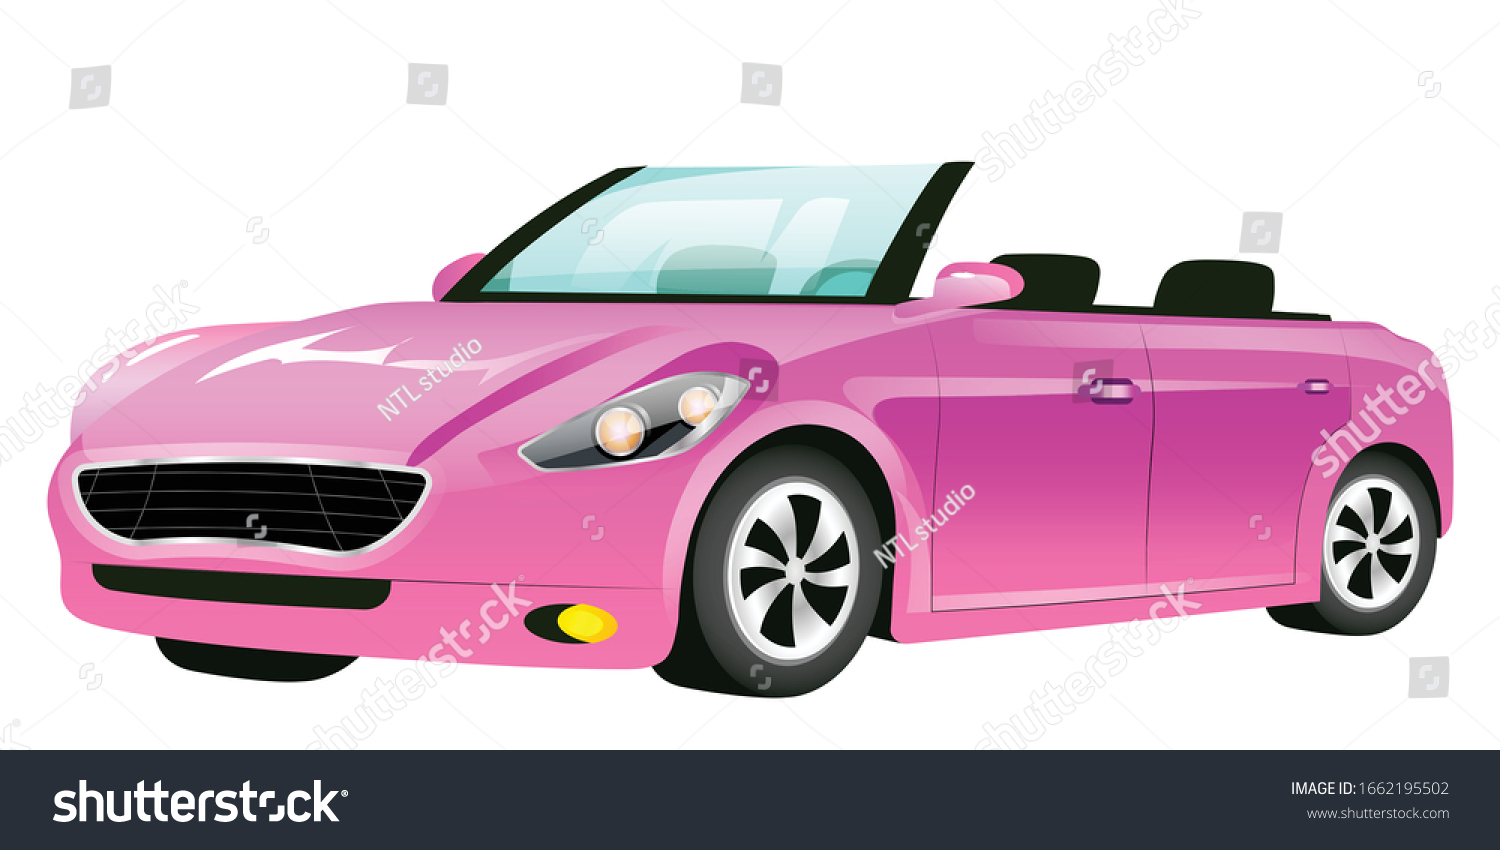 Pink cabriolet cartoon vector illustration. Stylish car for women, girly auto without roof flat color object. Luxurious personal transport without roof isolated on white background #1662195502